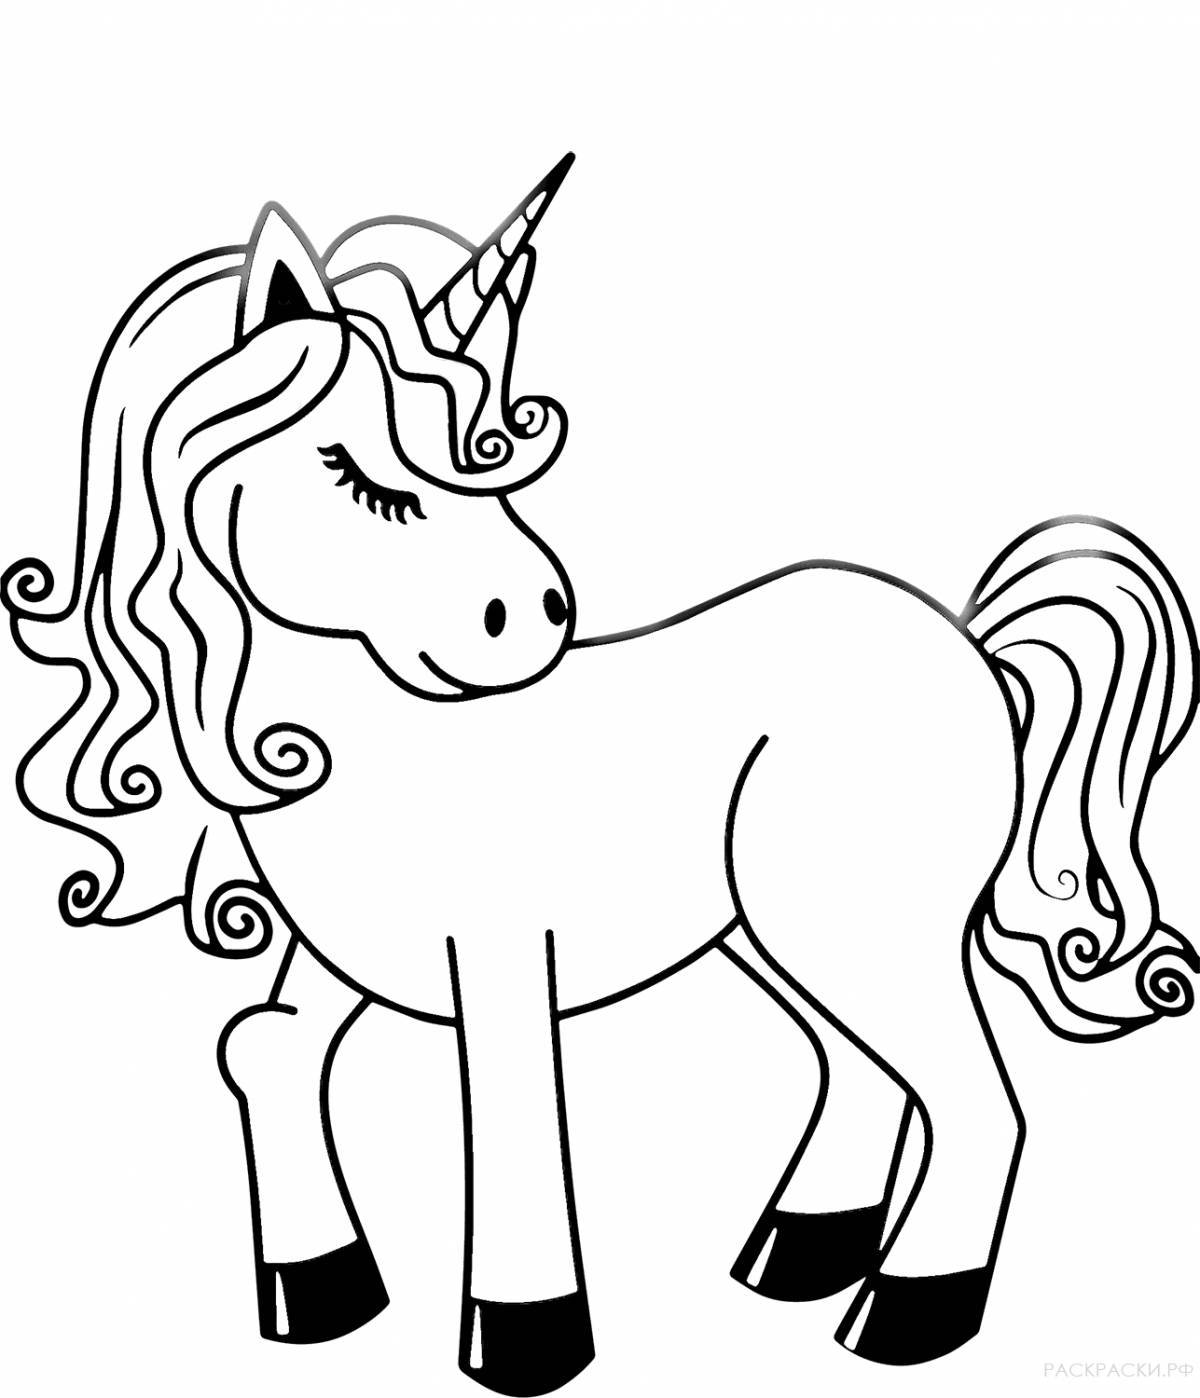 Glamourous unicorn coloring book for kids